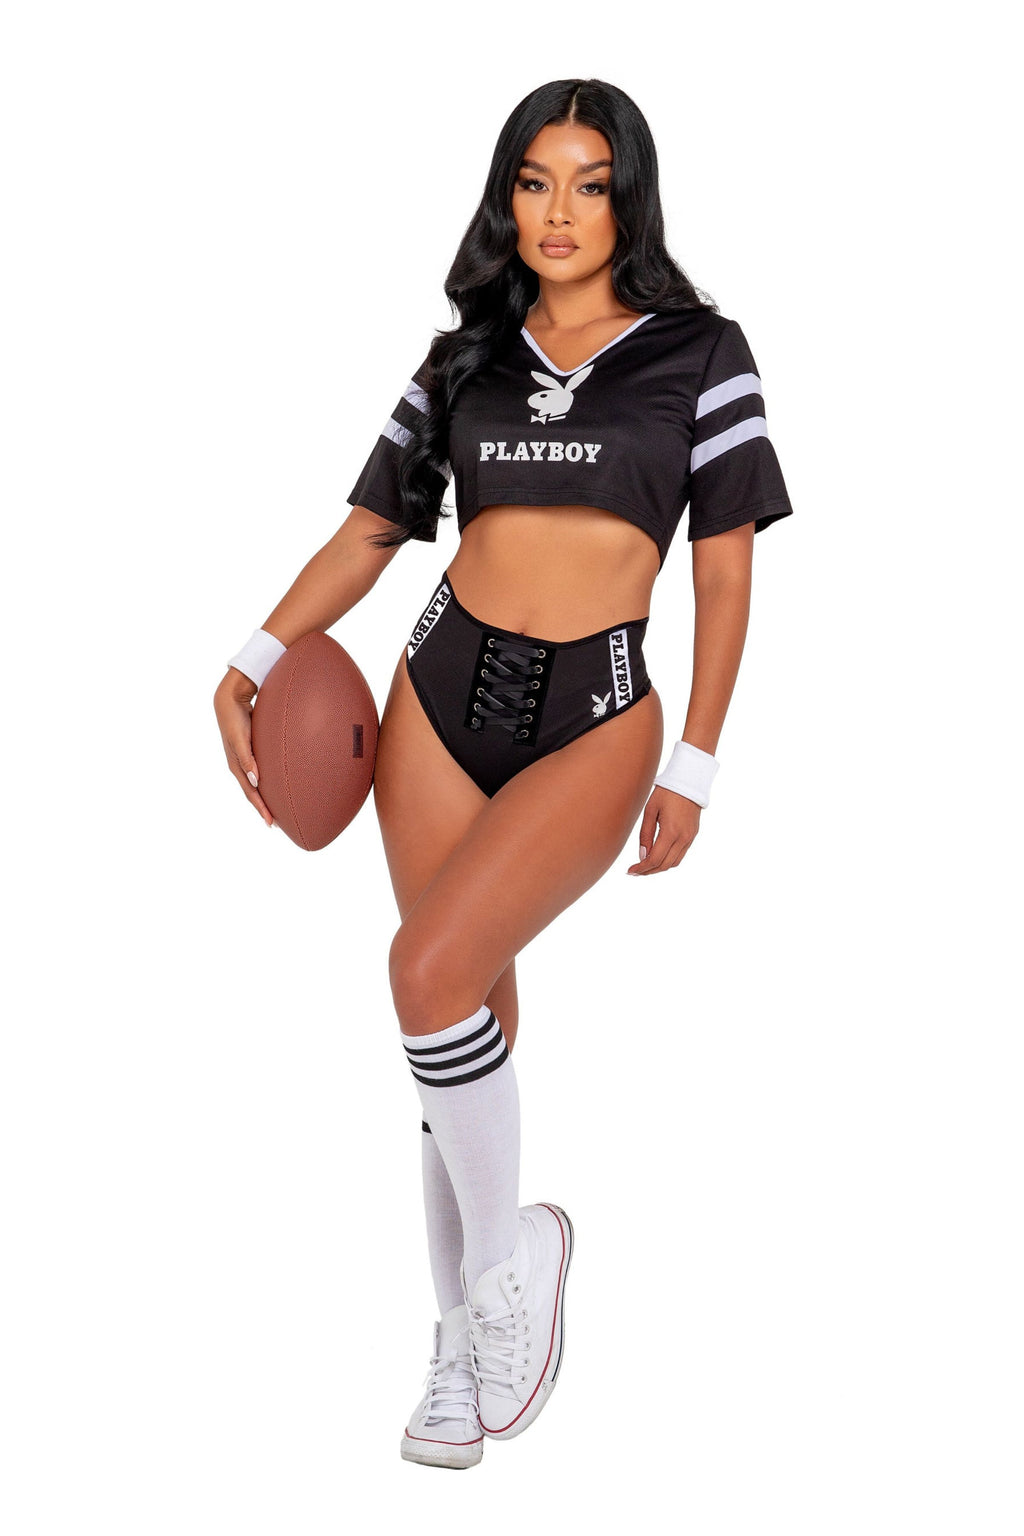 Playboy Sexy Football Outfit